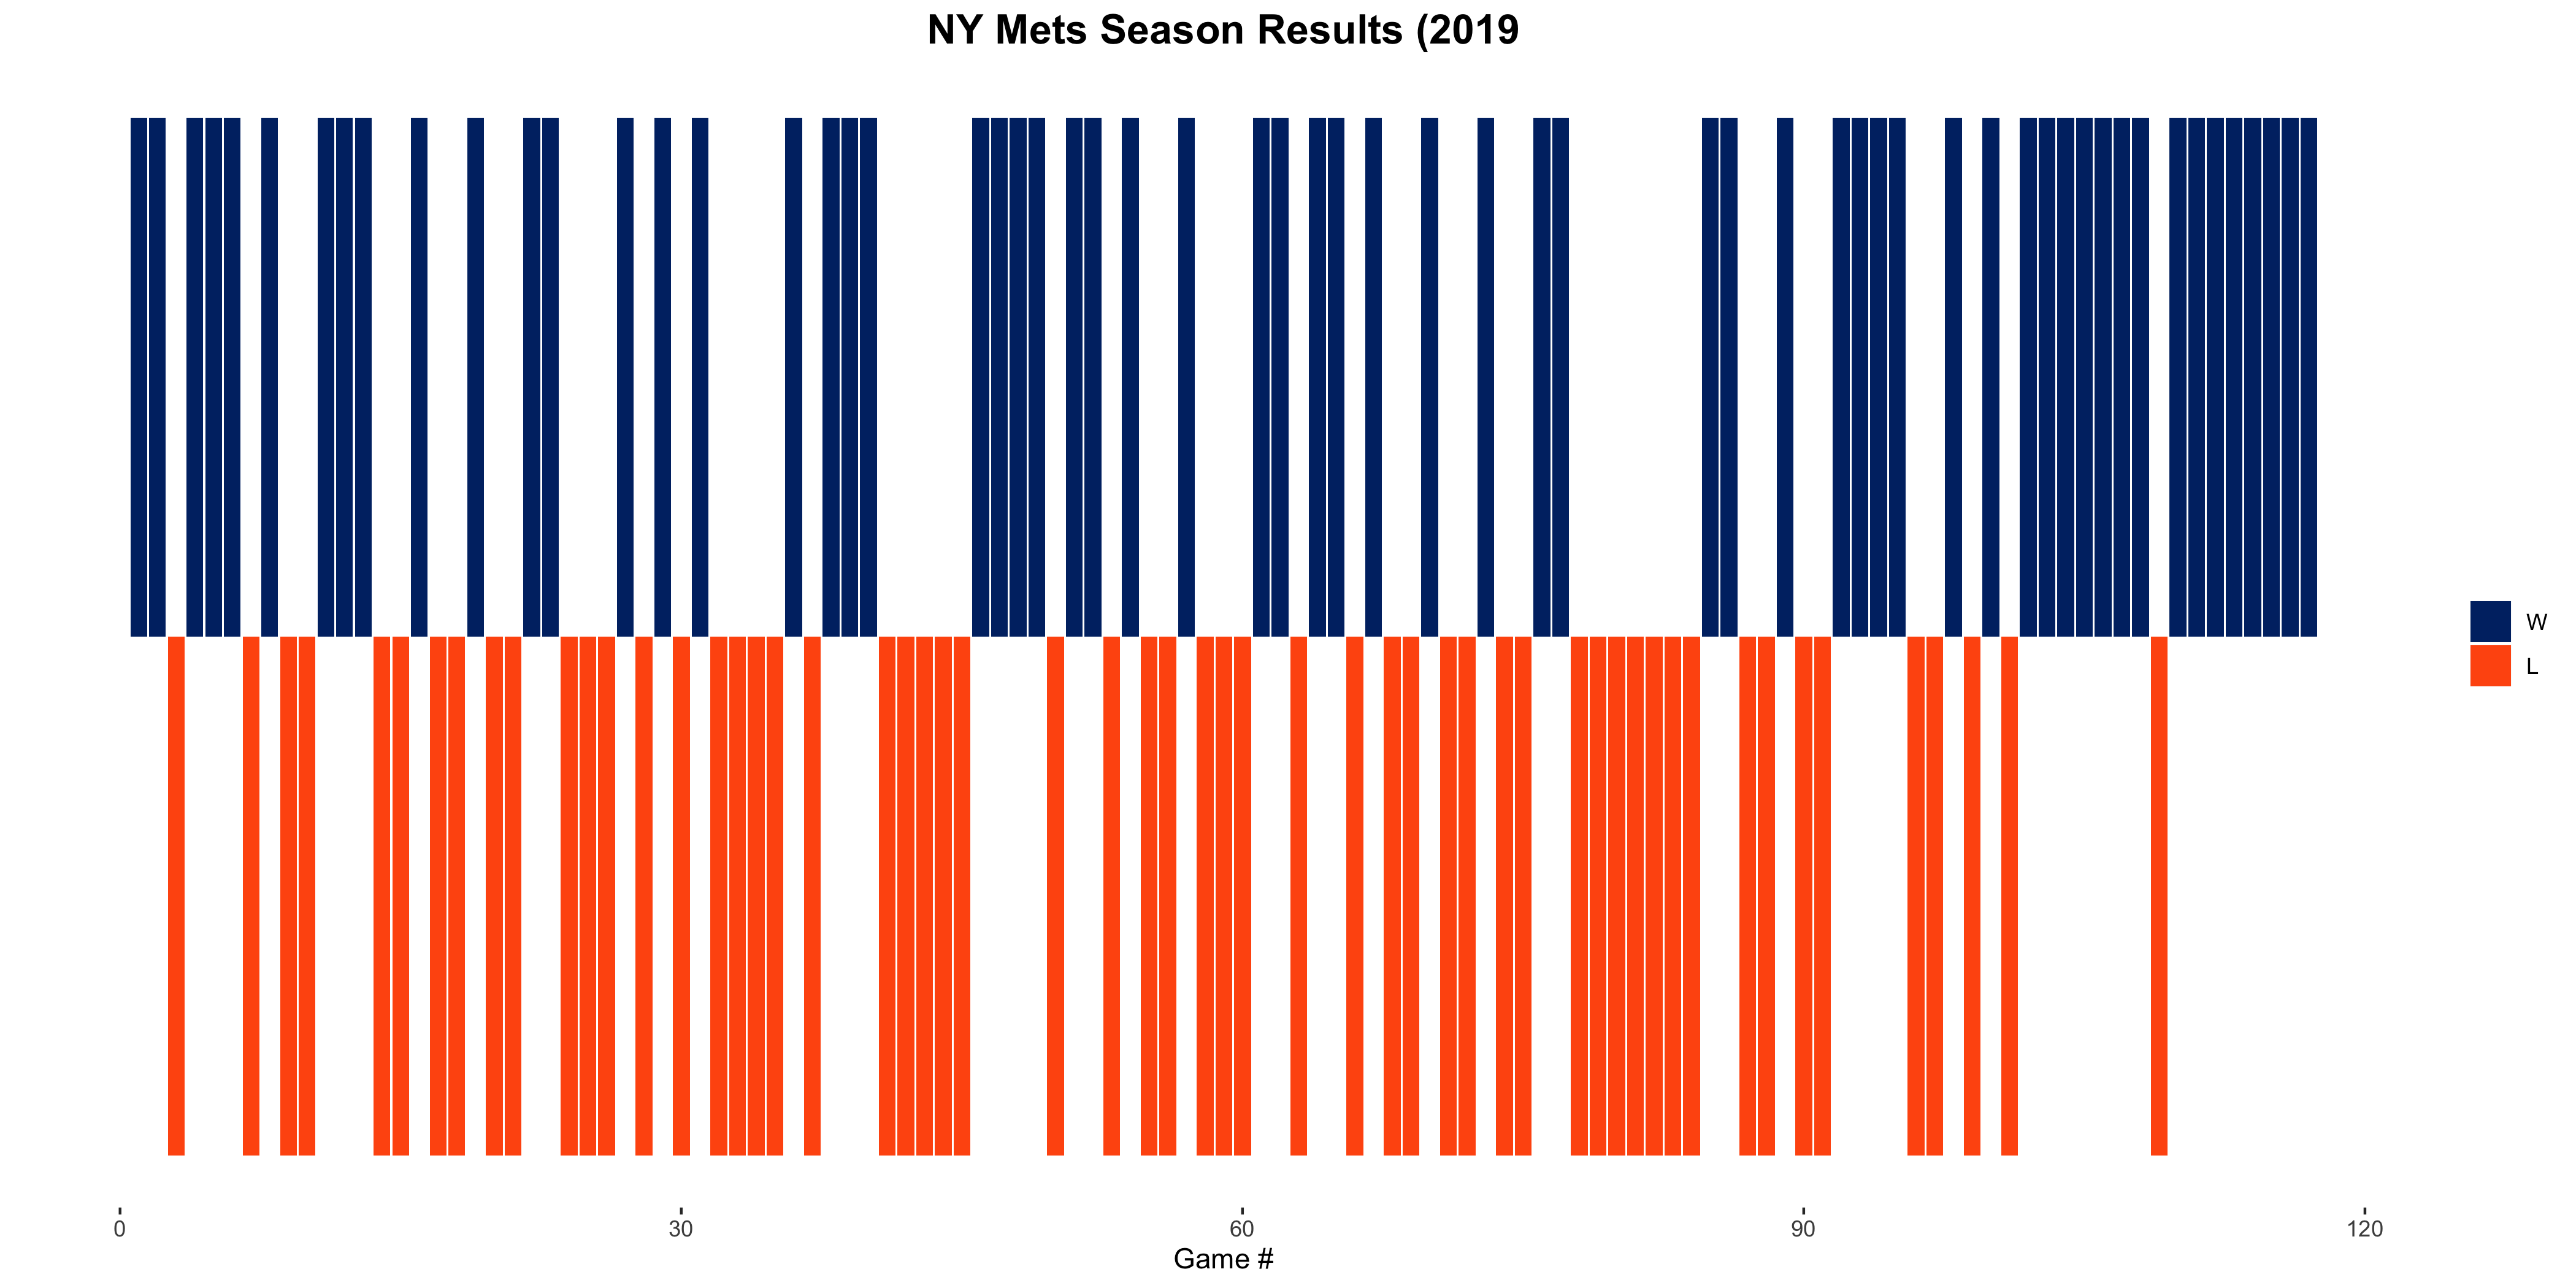 New York Mets won loss record for partially completed 2019 season